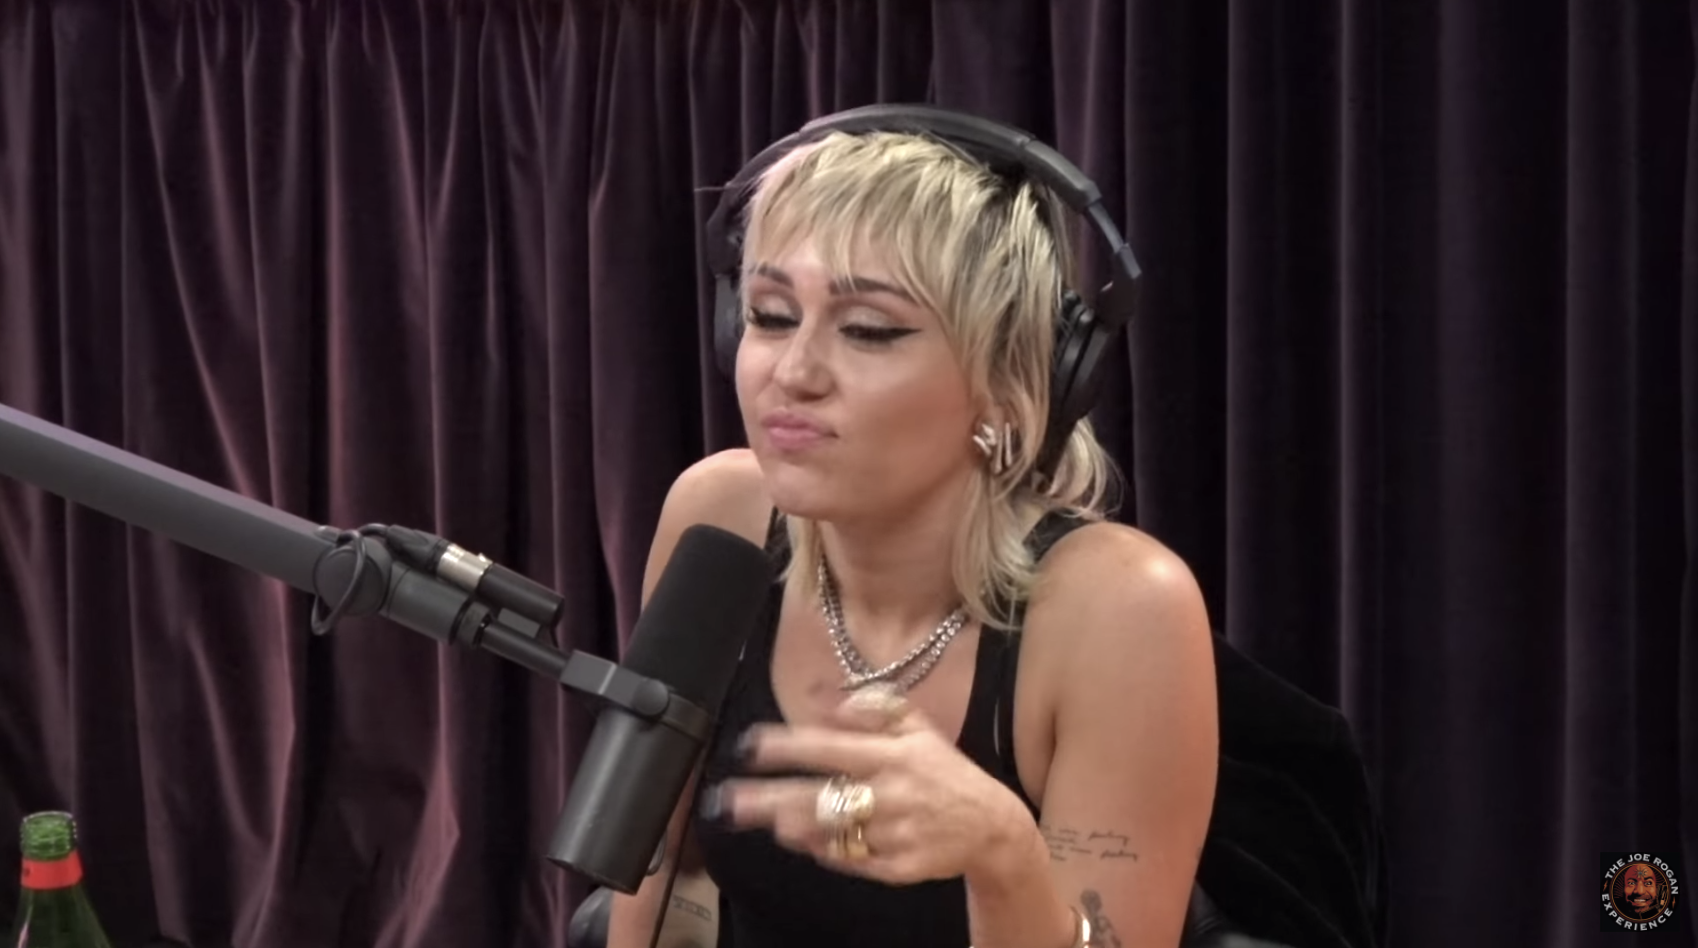 Miley clapping back &quot;That&#x27;s what I think when I&#x27;m watching your shows too.&quot;